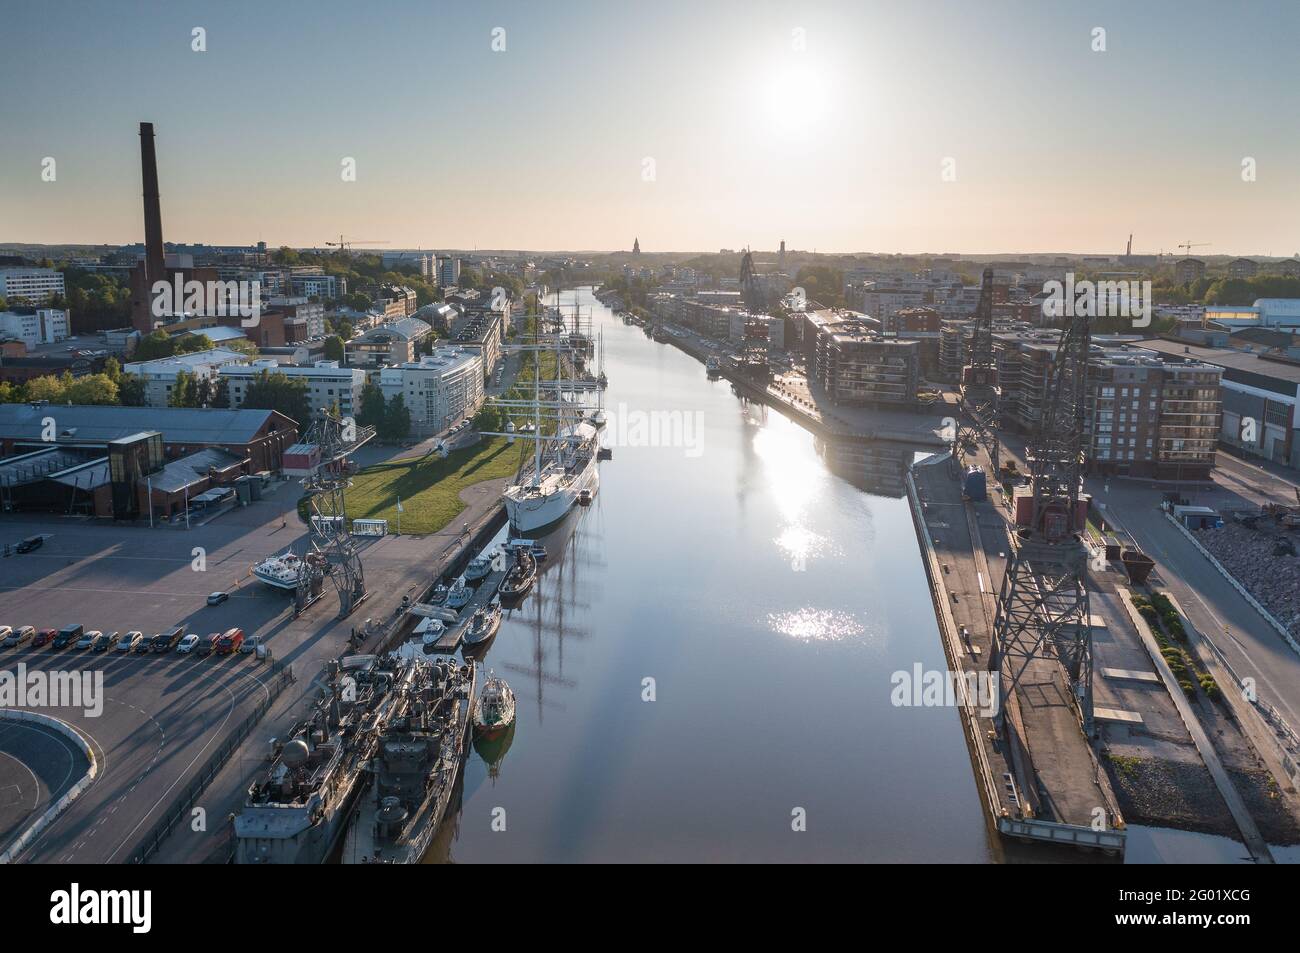 Turku, Finland - 30-05-2021: Aerial view of the city skyline with Swan of Finland in Aurajoki river in summer. Stock Photo